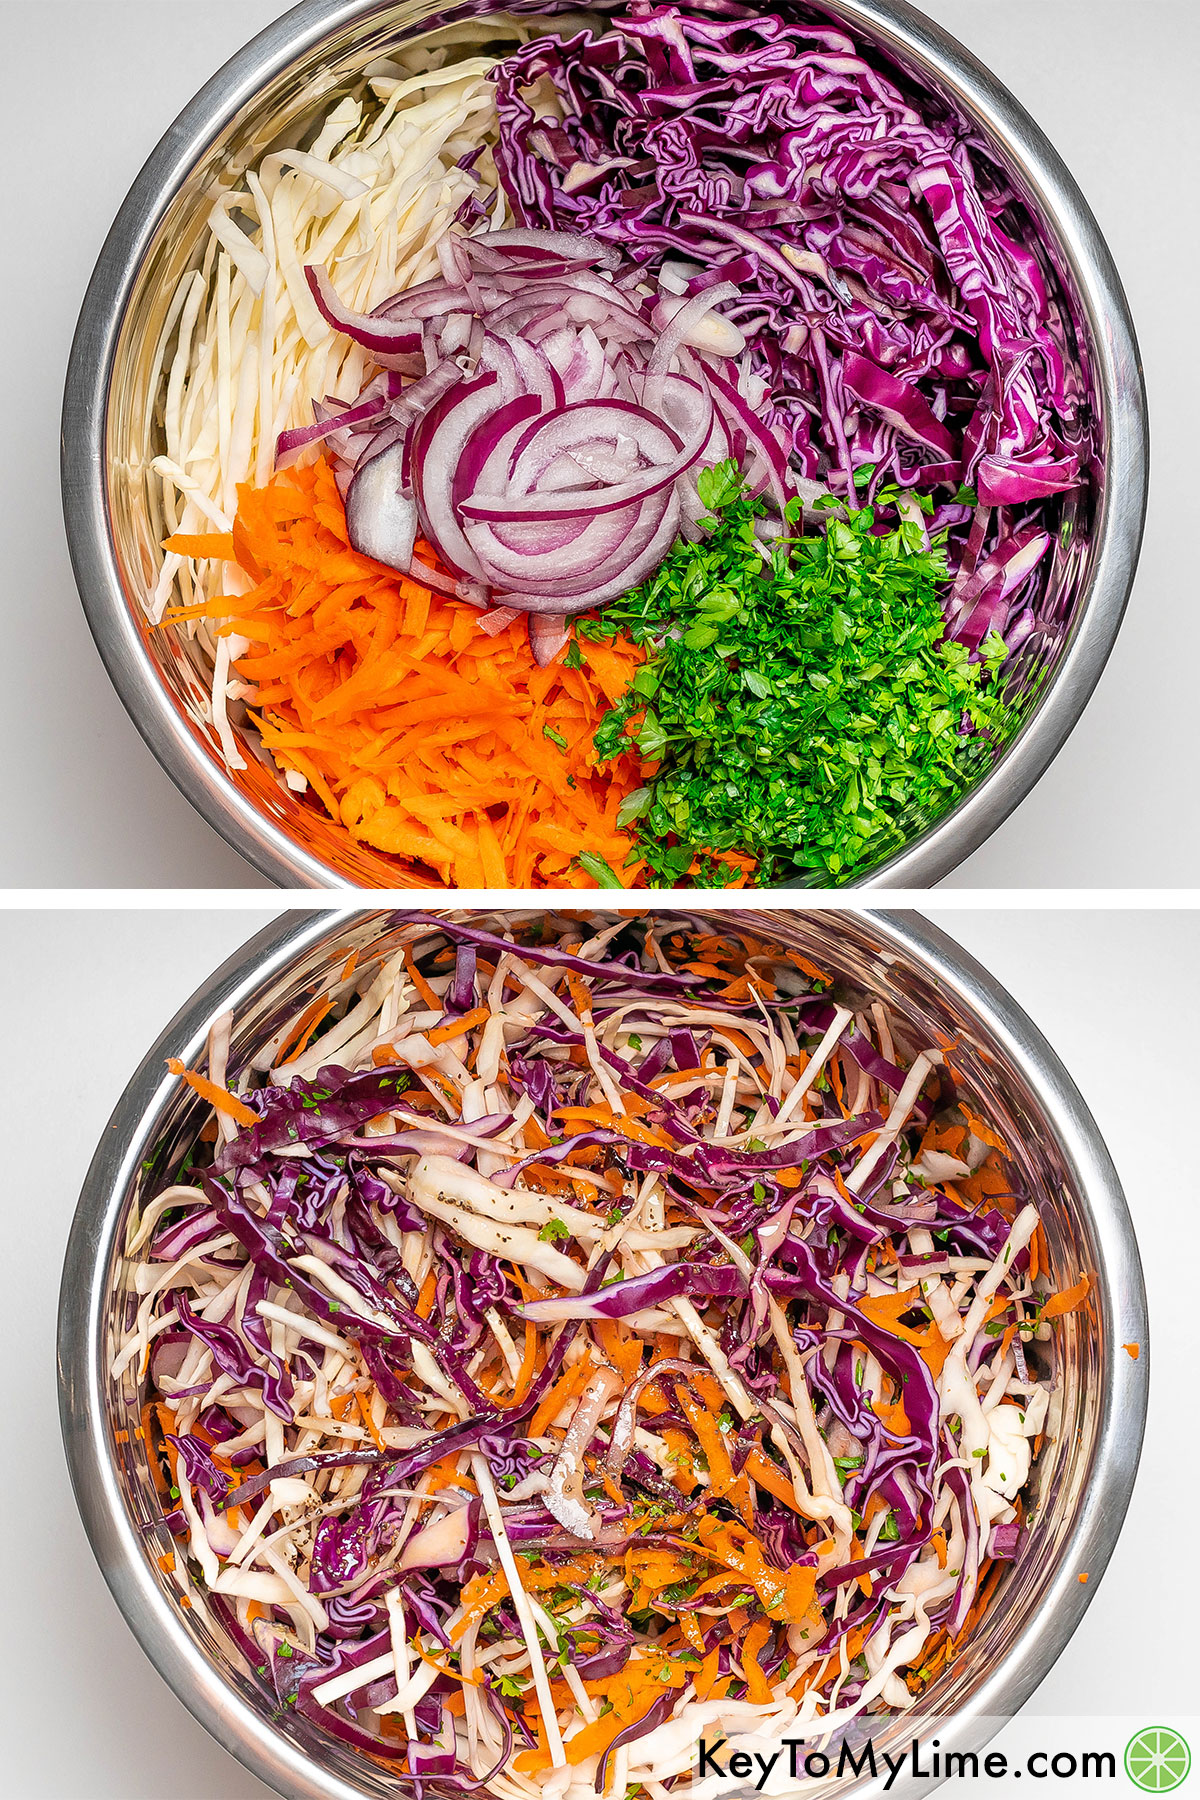 Adding the sliced vegetables to a large mixing bowl then tossing together and adding the dressing once mixed.